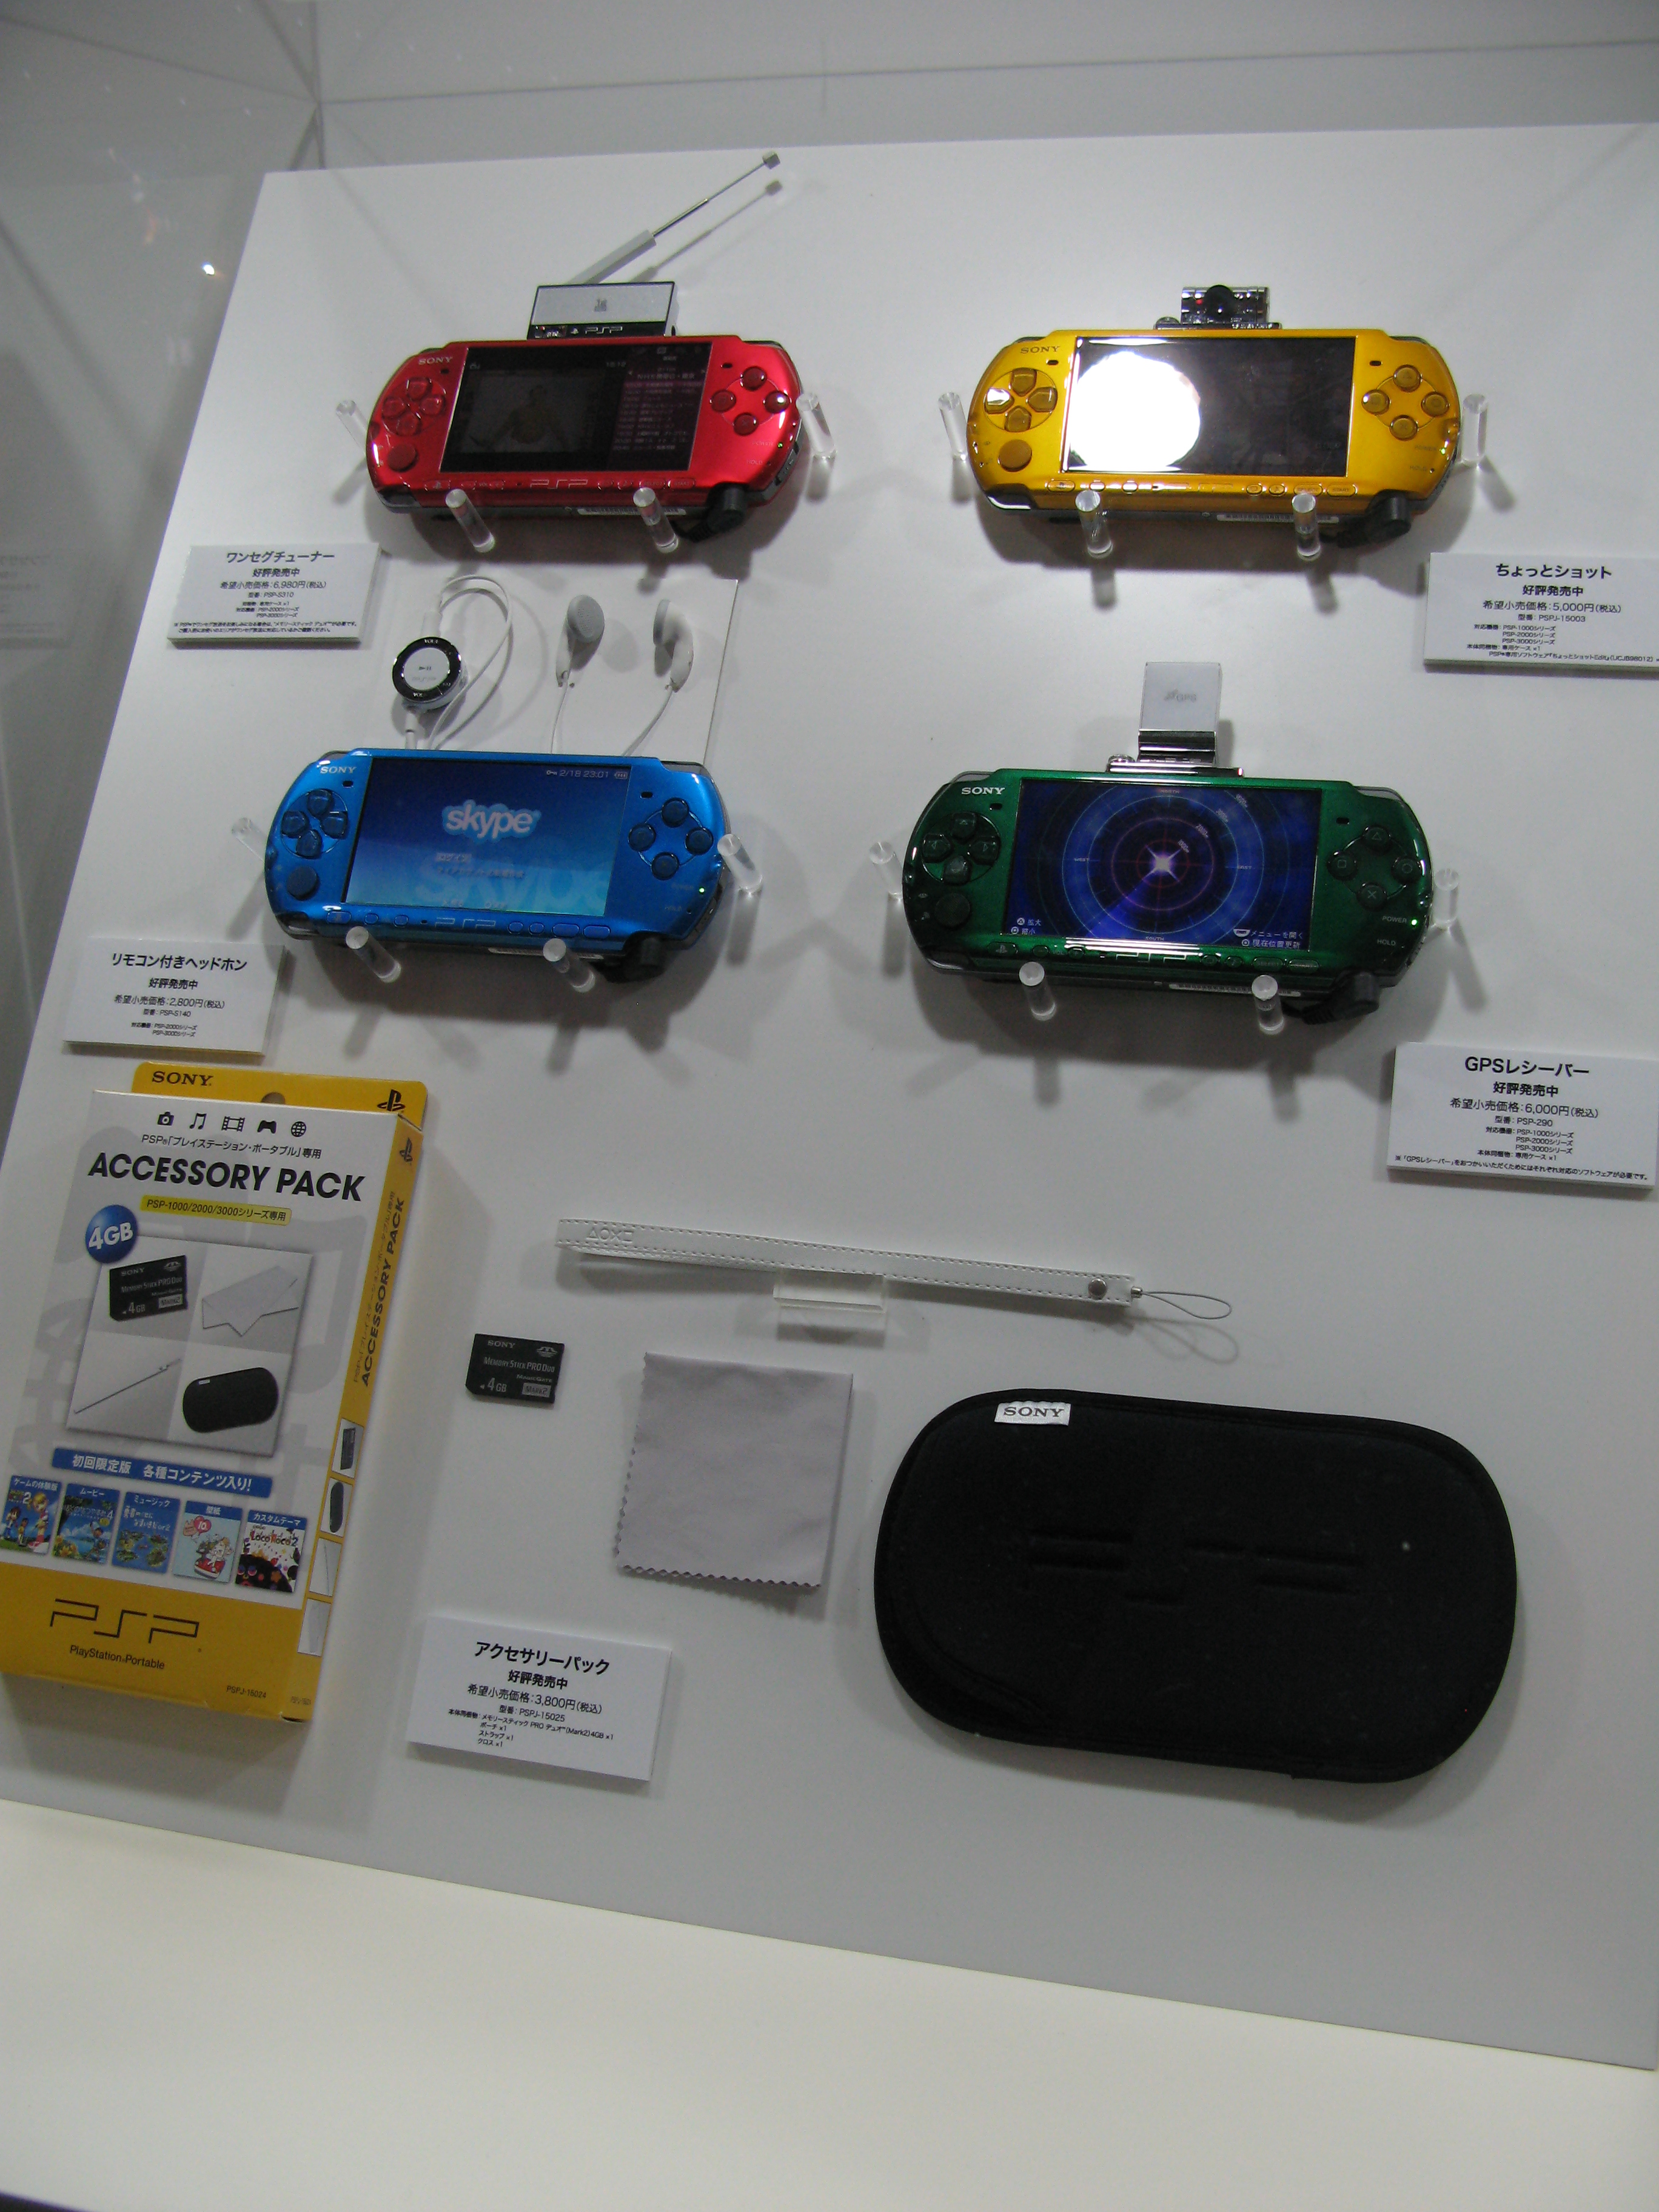 File:PSP new models, accessories and packs.jpg - Wikimedia Commons